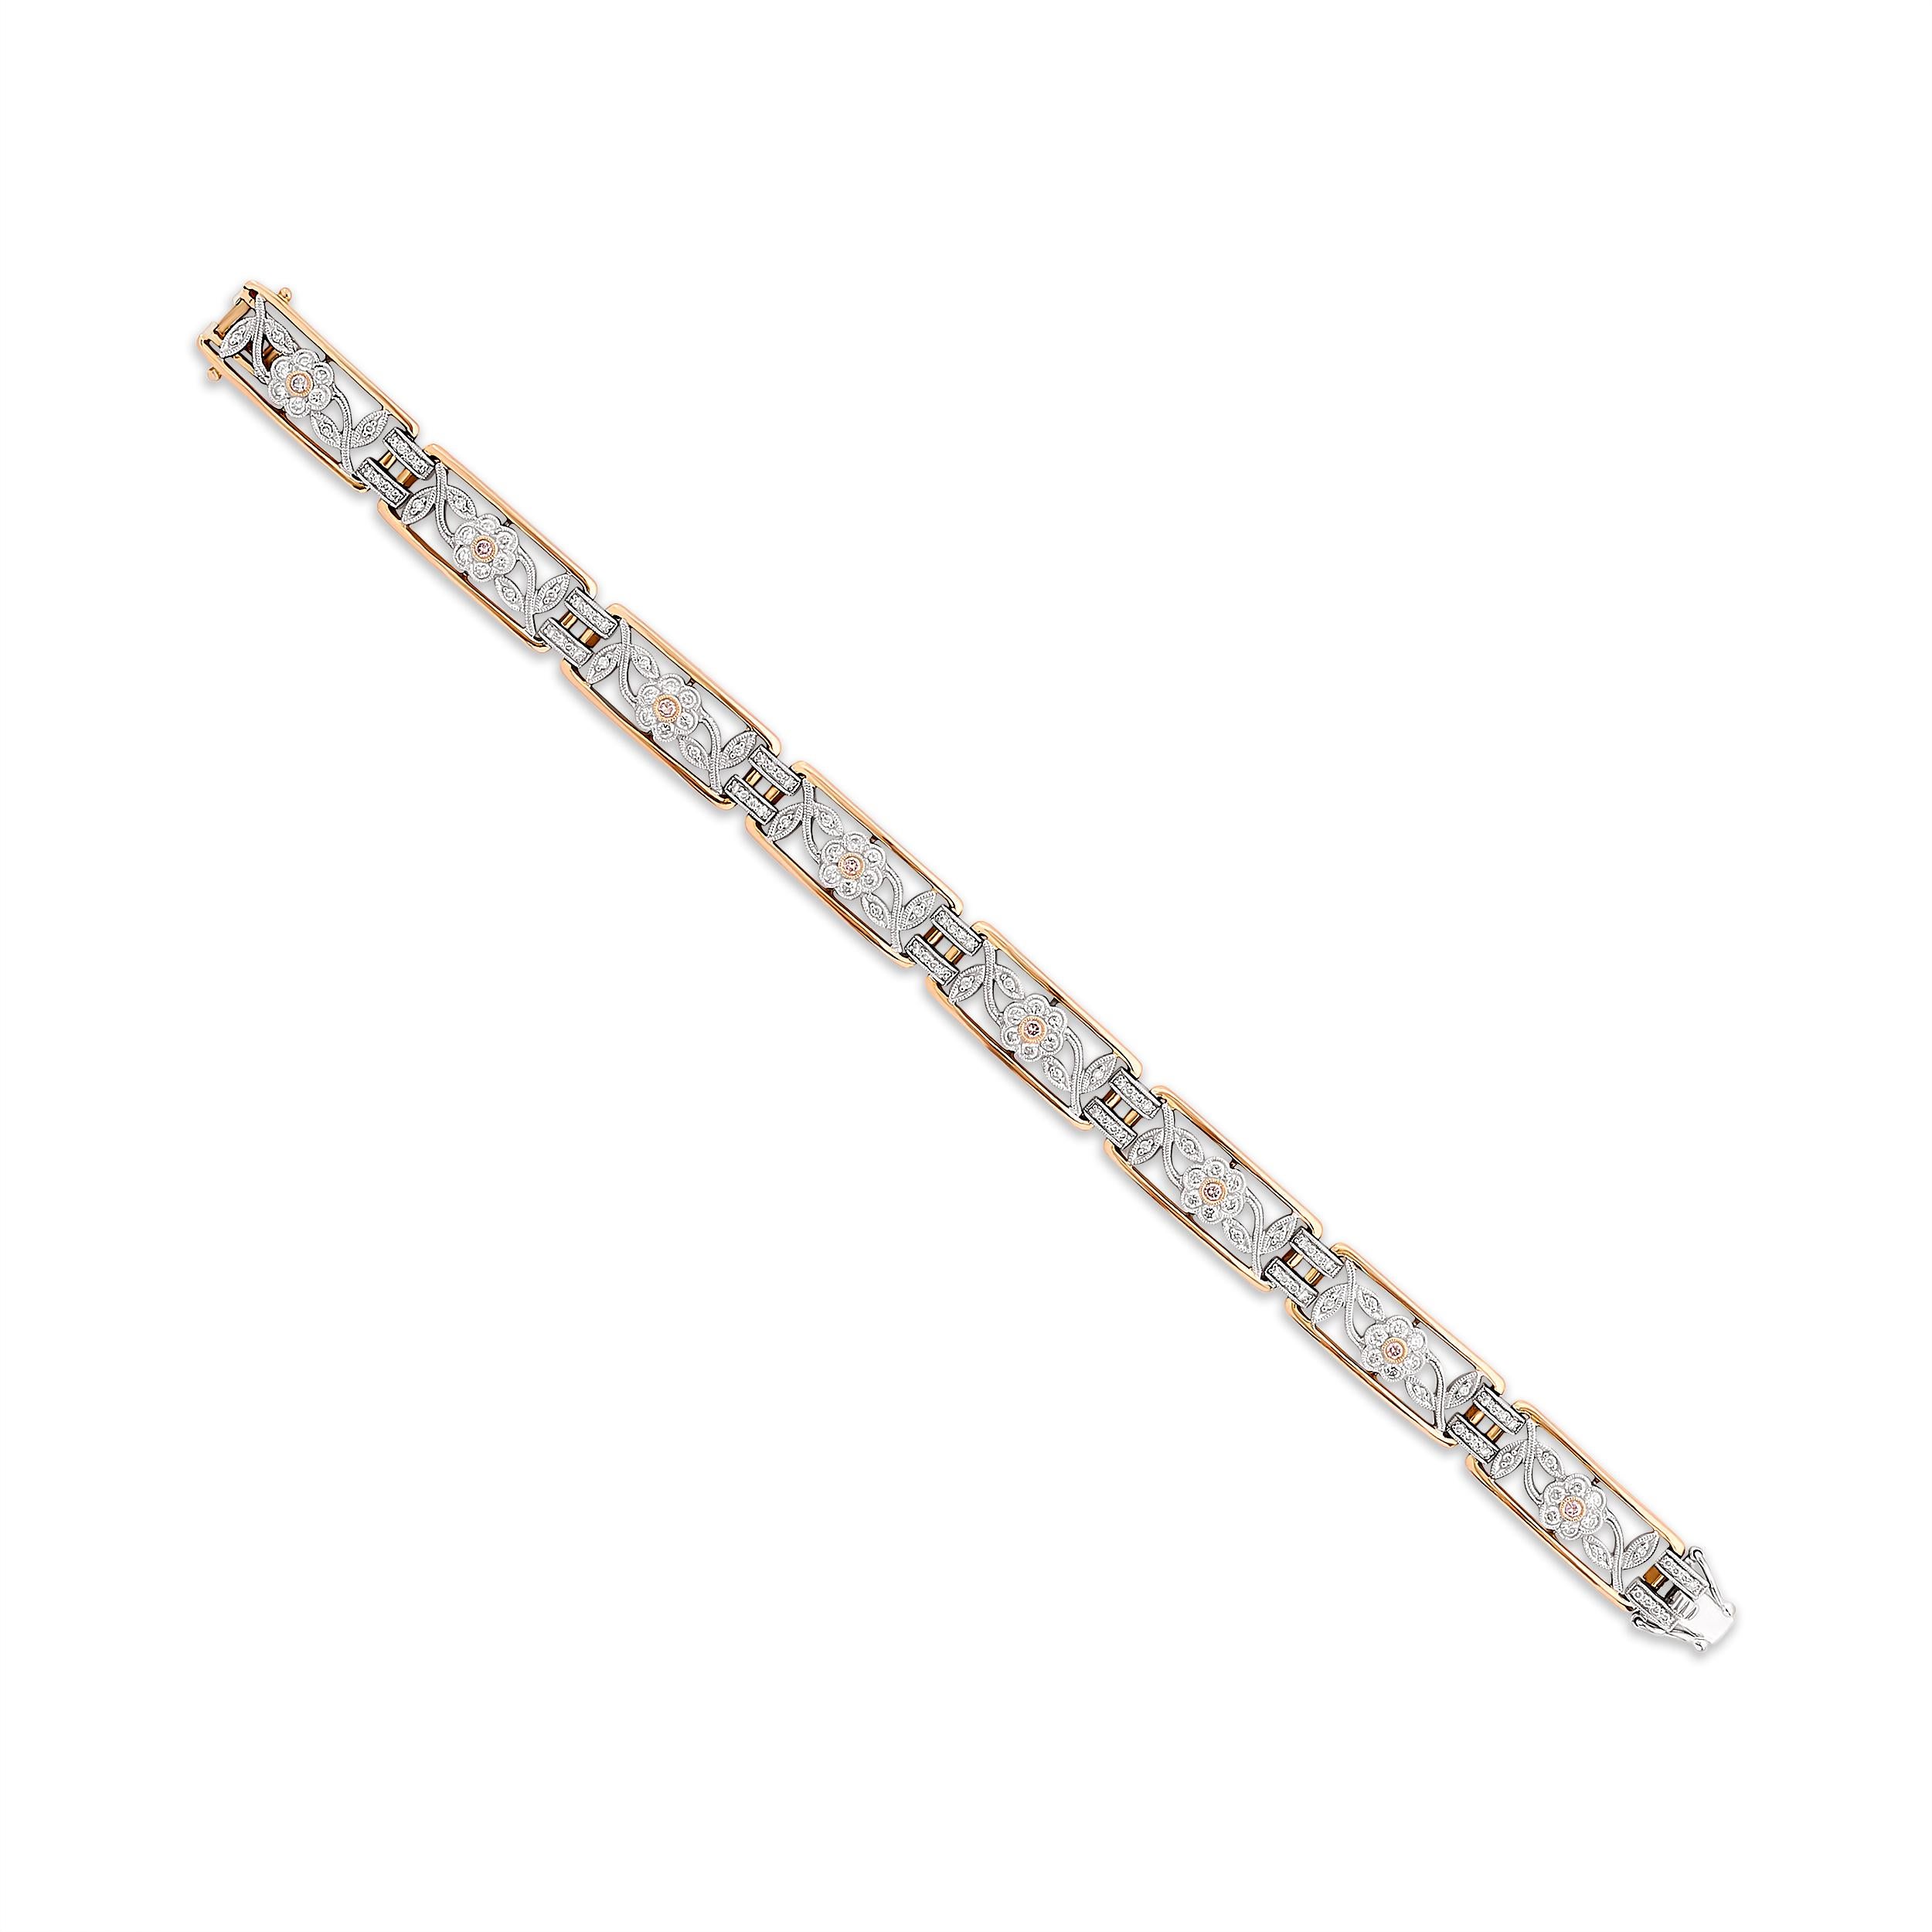 Ravel in the delicate beauty of this Simon G bracelet, where the blend of rose and white gold intertwines with pink and white diamonds in a captivating flower link pattern.

The bracelet has 8 round pink diamonds that weight approximately 0.18 total